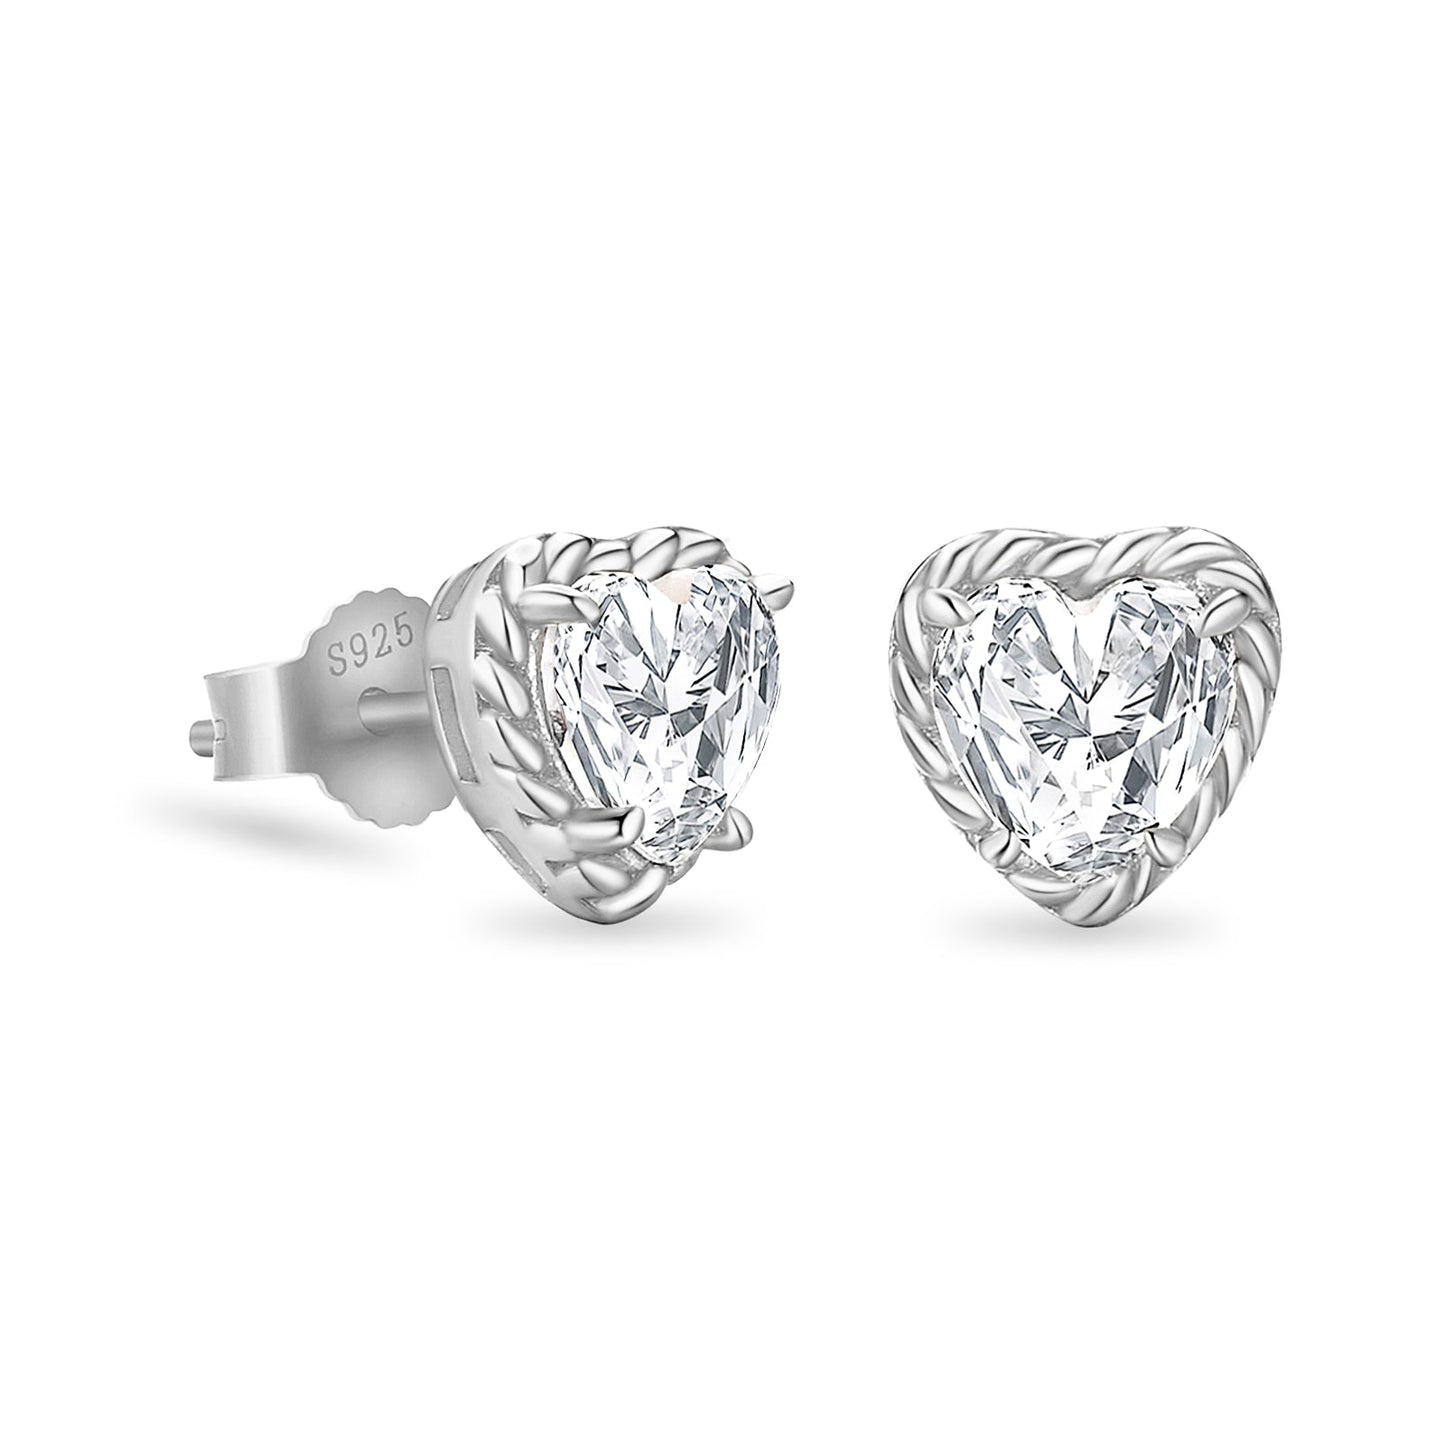 Scarabeaus Twisted Heart-shaped Stud Earrings CZ Stone for Men and Women in 14K Gold / White Gold